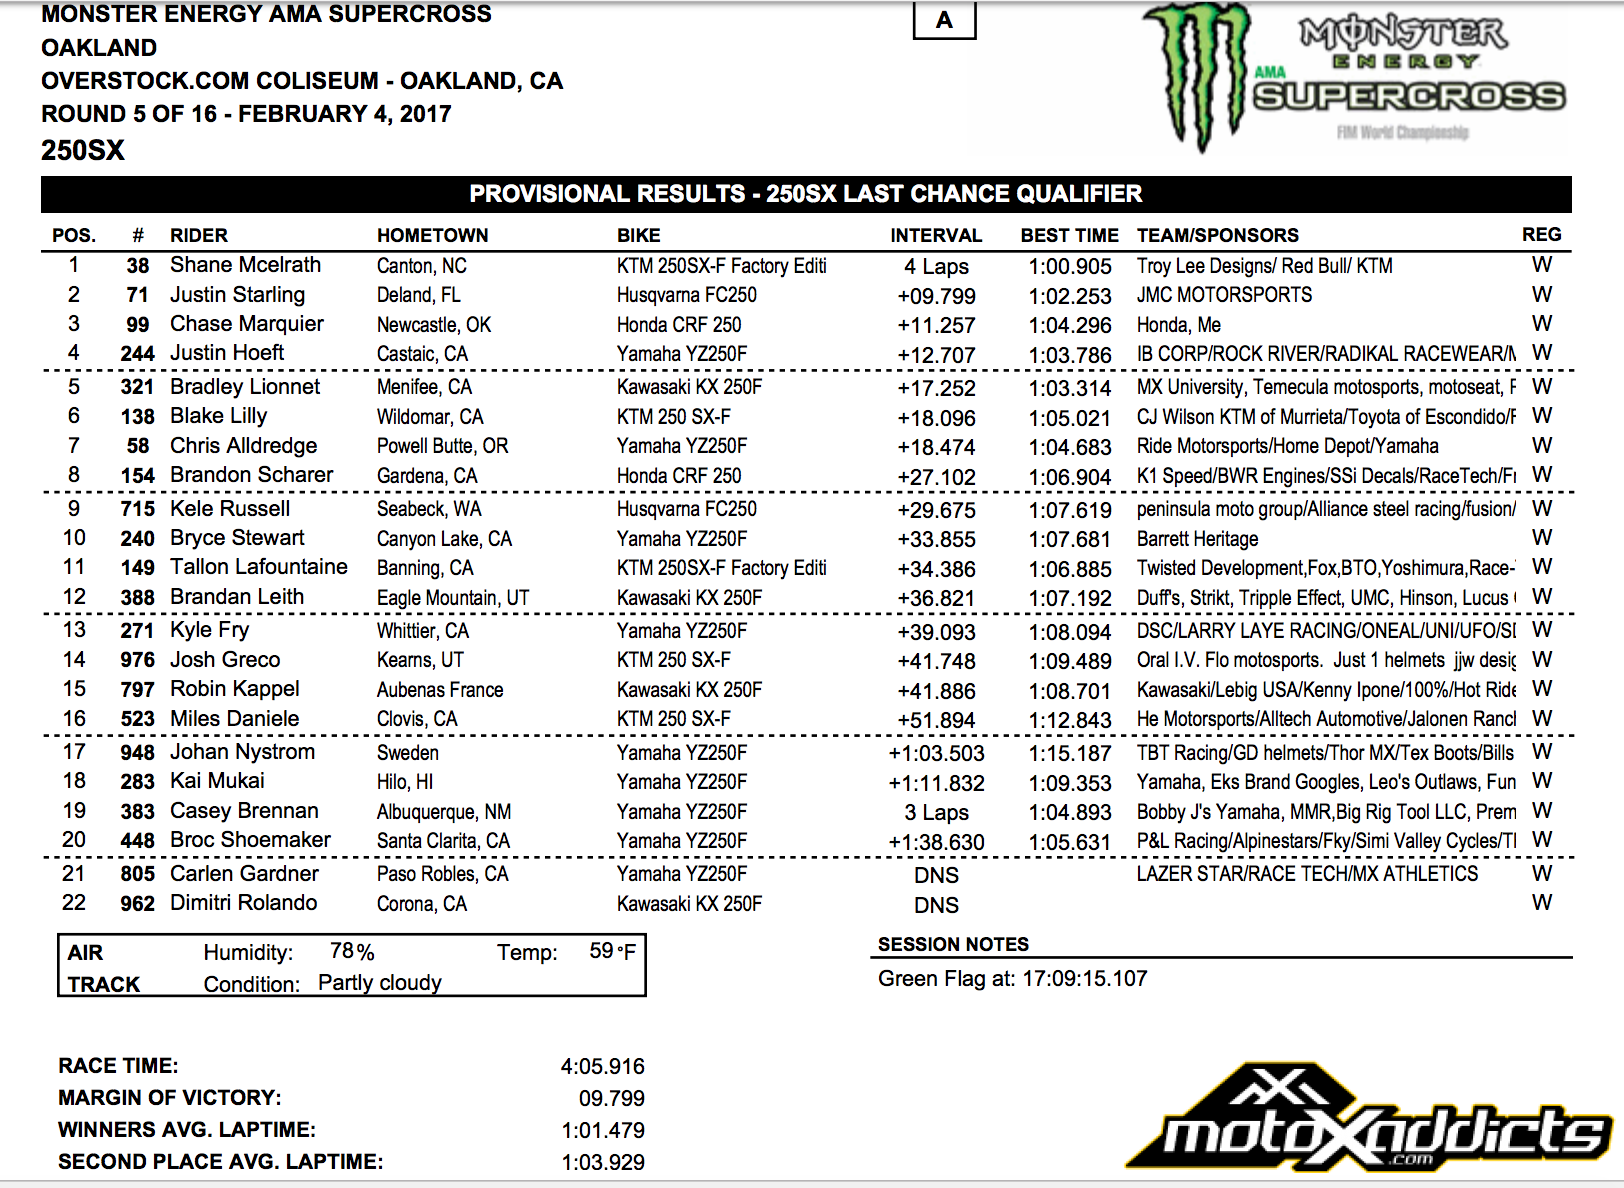  250SX LCQ Results - 2017 Oakland SX - Click to Enlarge